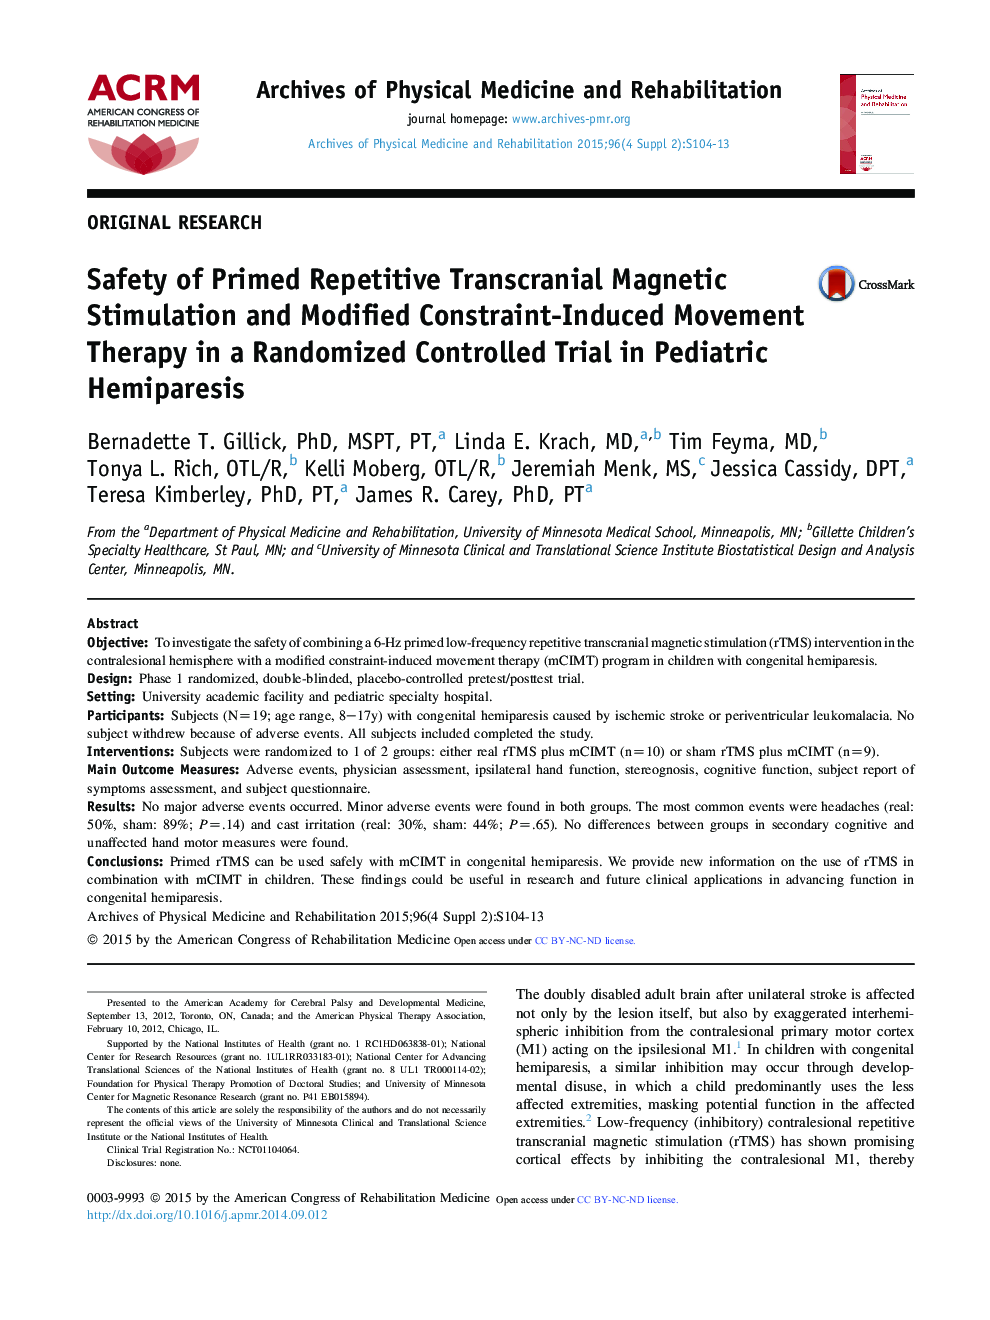 Safety of Primed Repetitive Transcranial Magnetic Stimulation and Modified Constraint-Induced Movement Therapy inÂ a Randomized Controlled Trial in Pediatric Hemiparesis